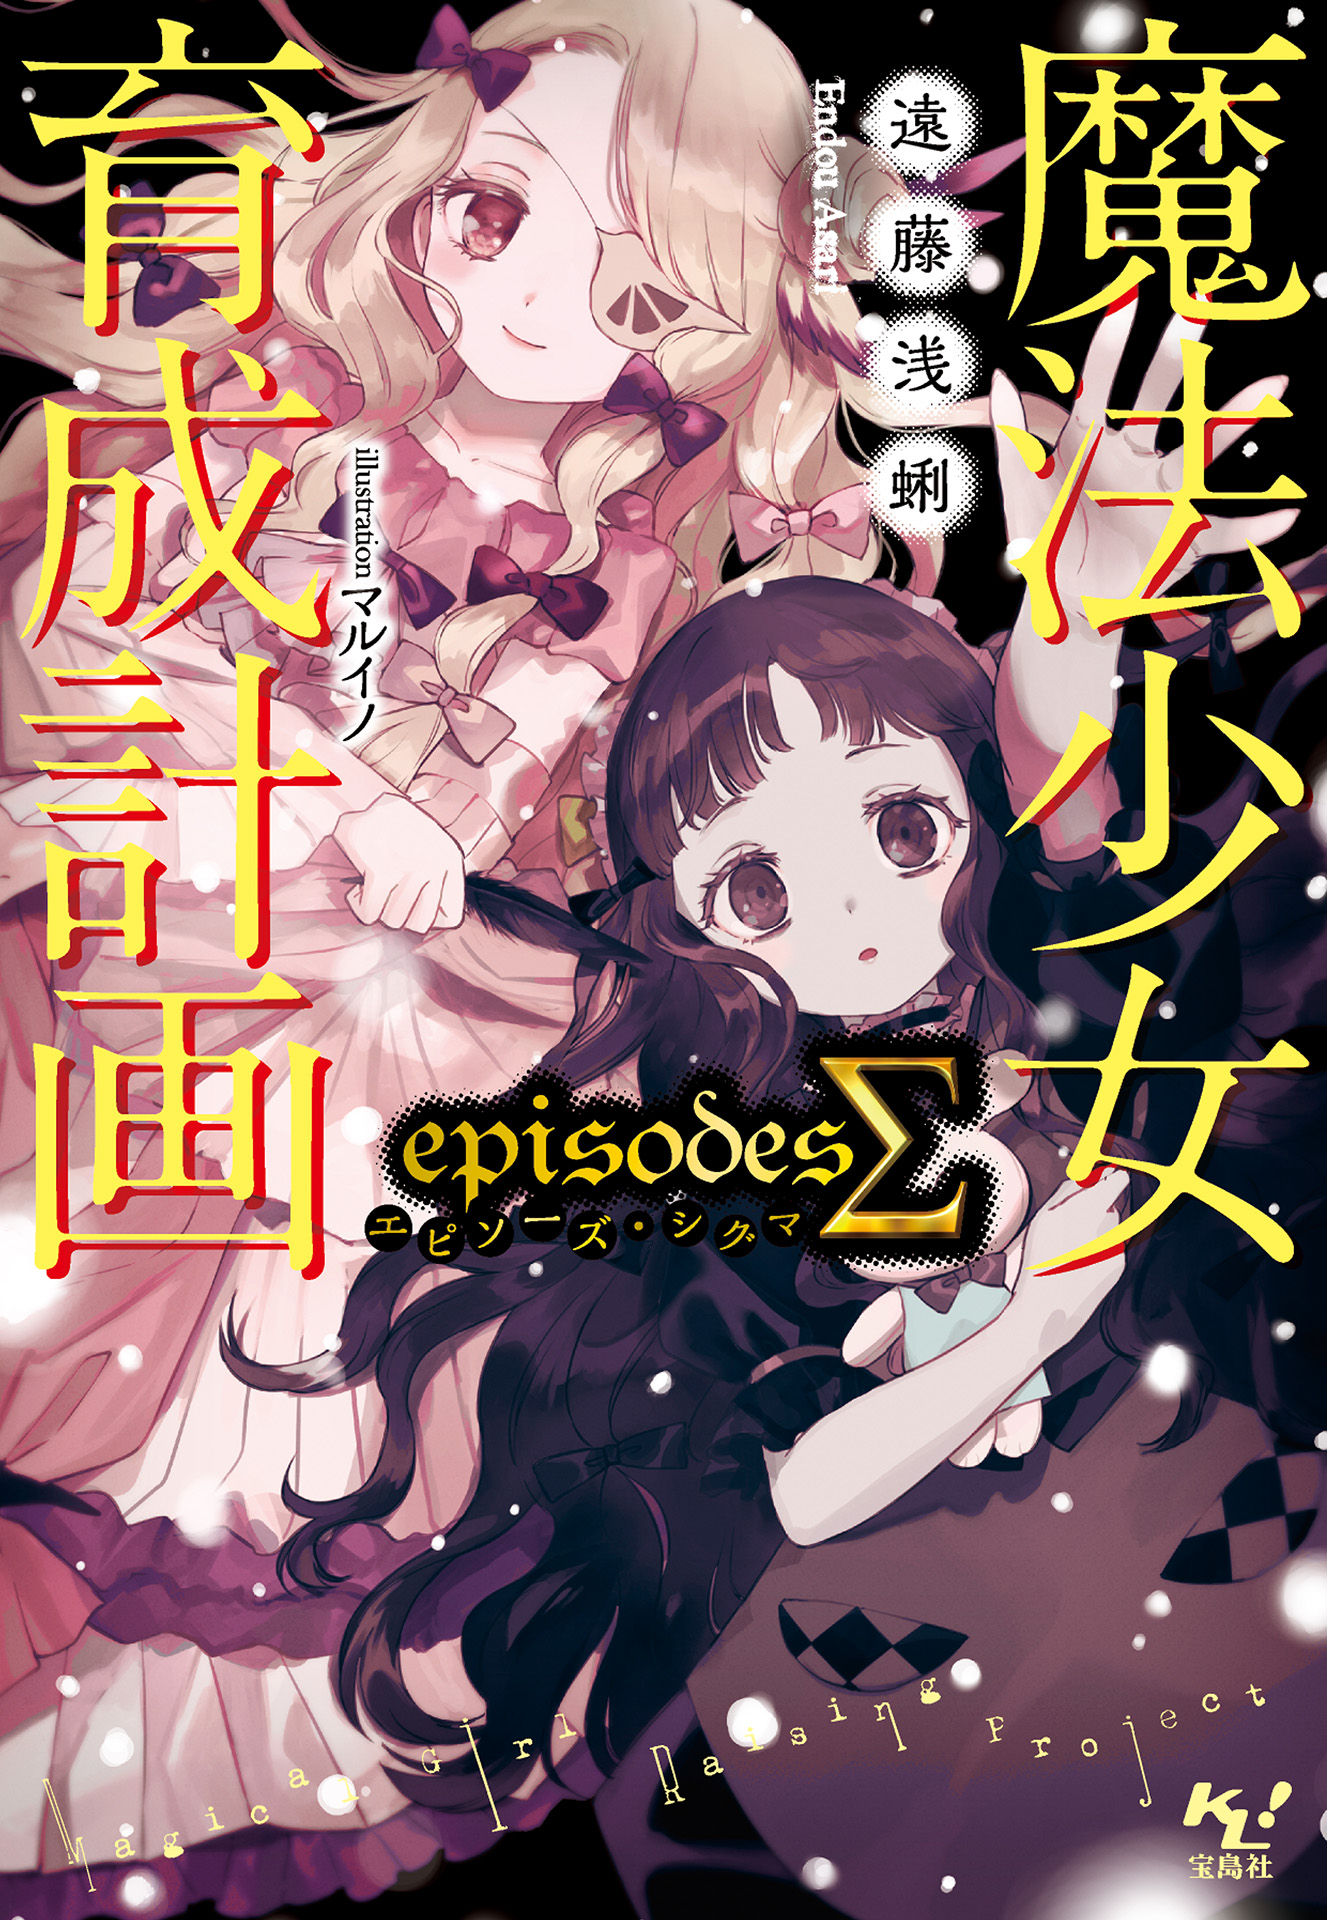 Magical Girl Raising Project: Episodes Σ